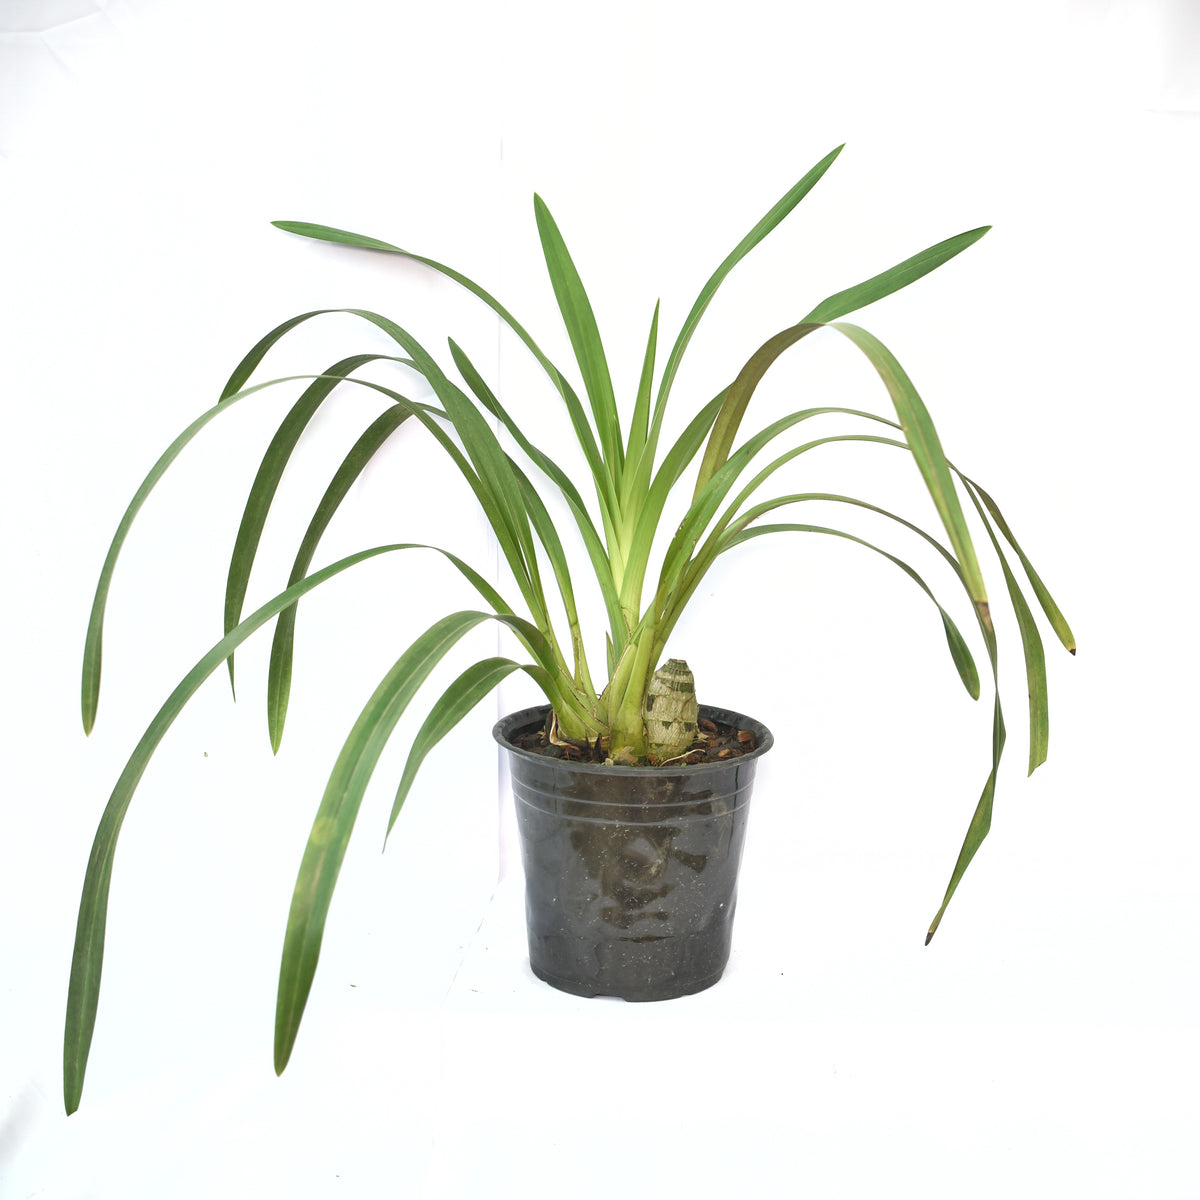 Thriving in moderate to bright indirect light, the Cymbidium Levis Duke 'Butterball' Orchid is adaptable to various lighting conditions, making it suitable for both indoor and outdoor cultivation.